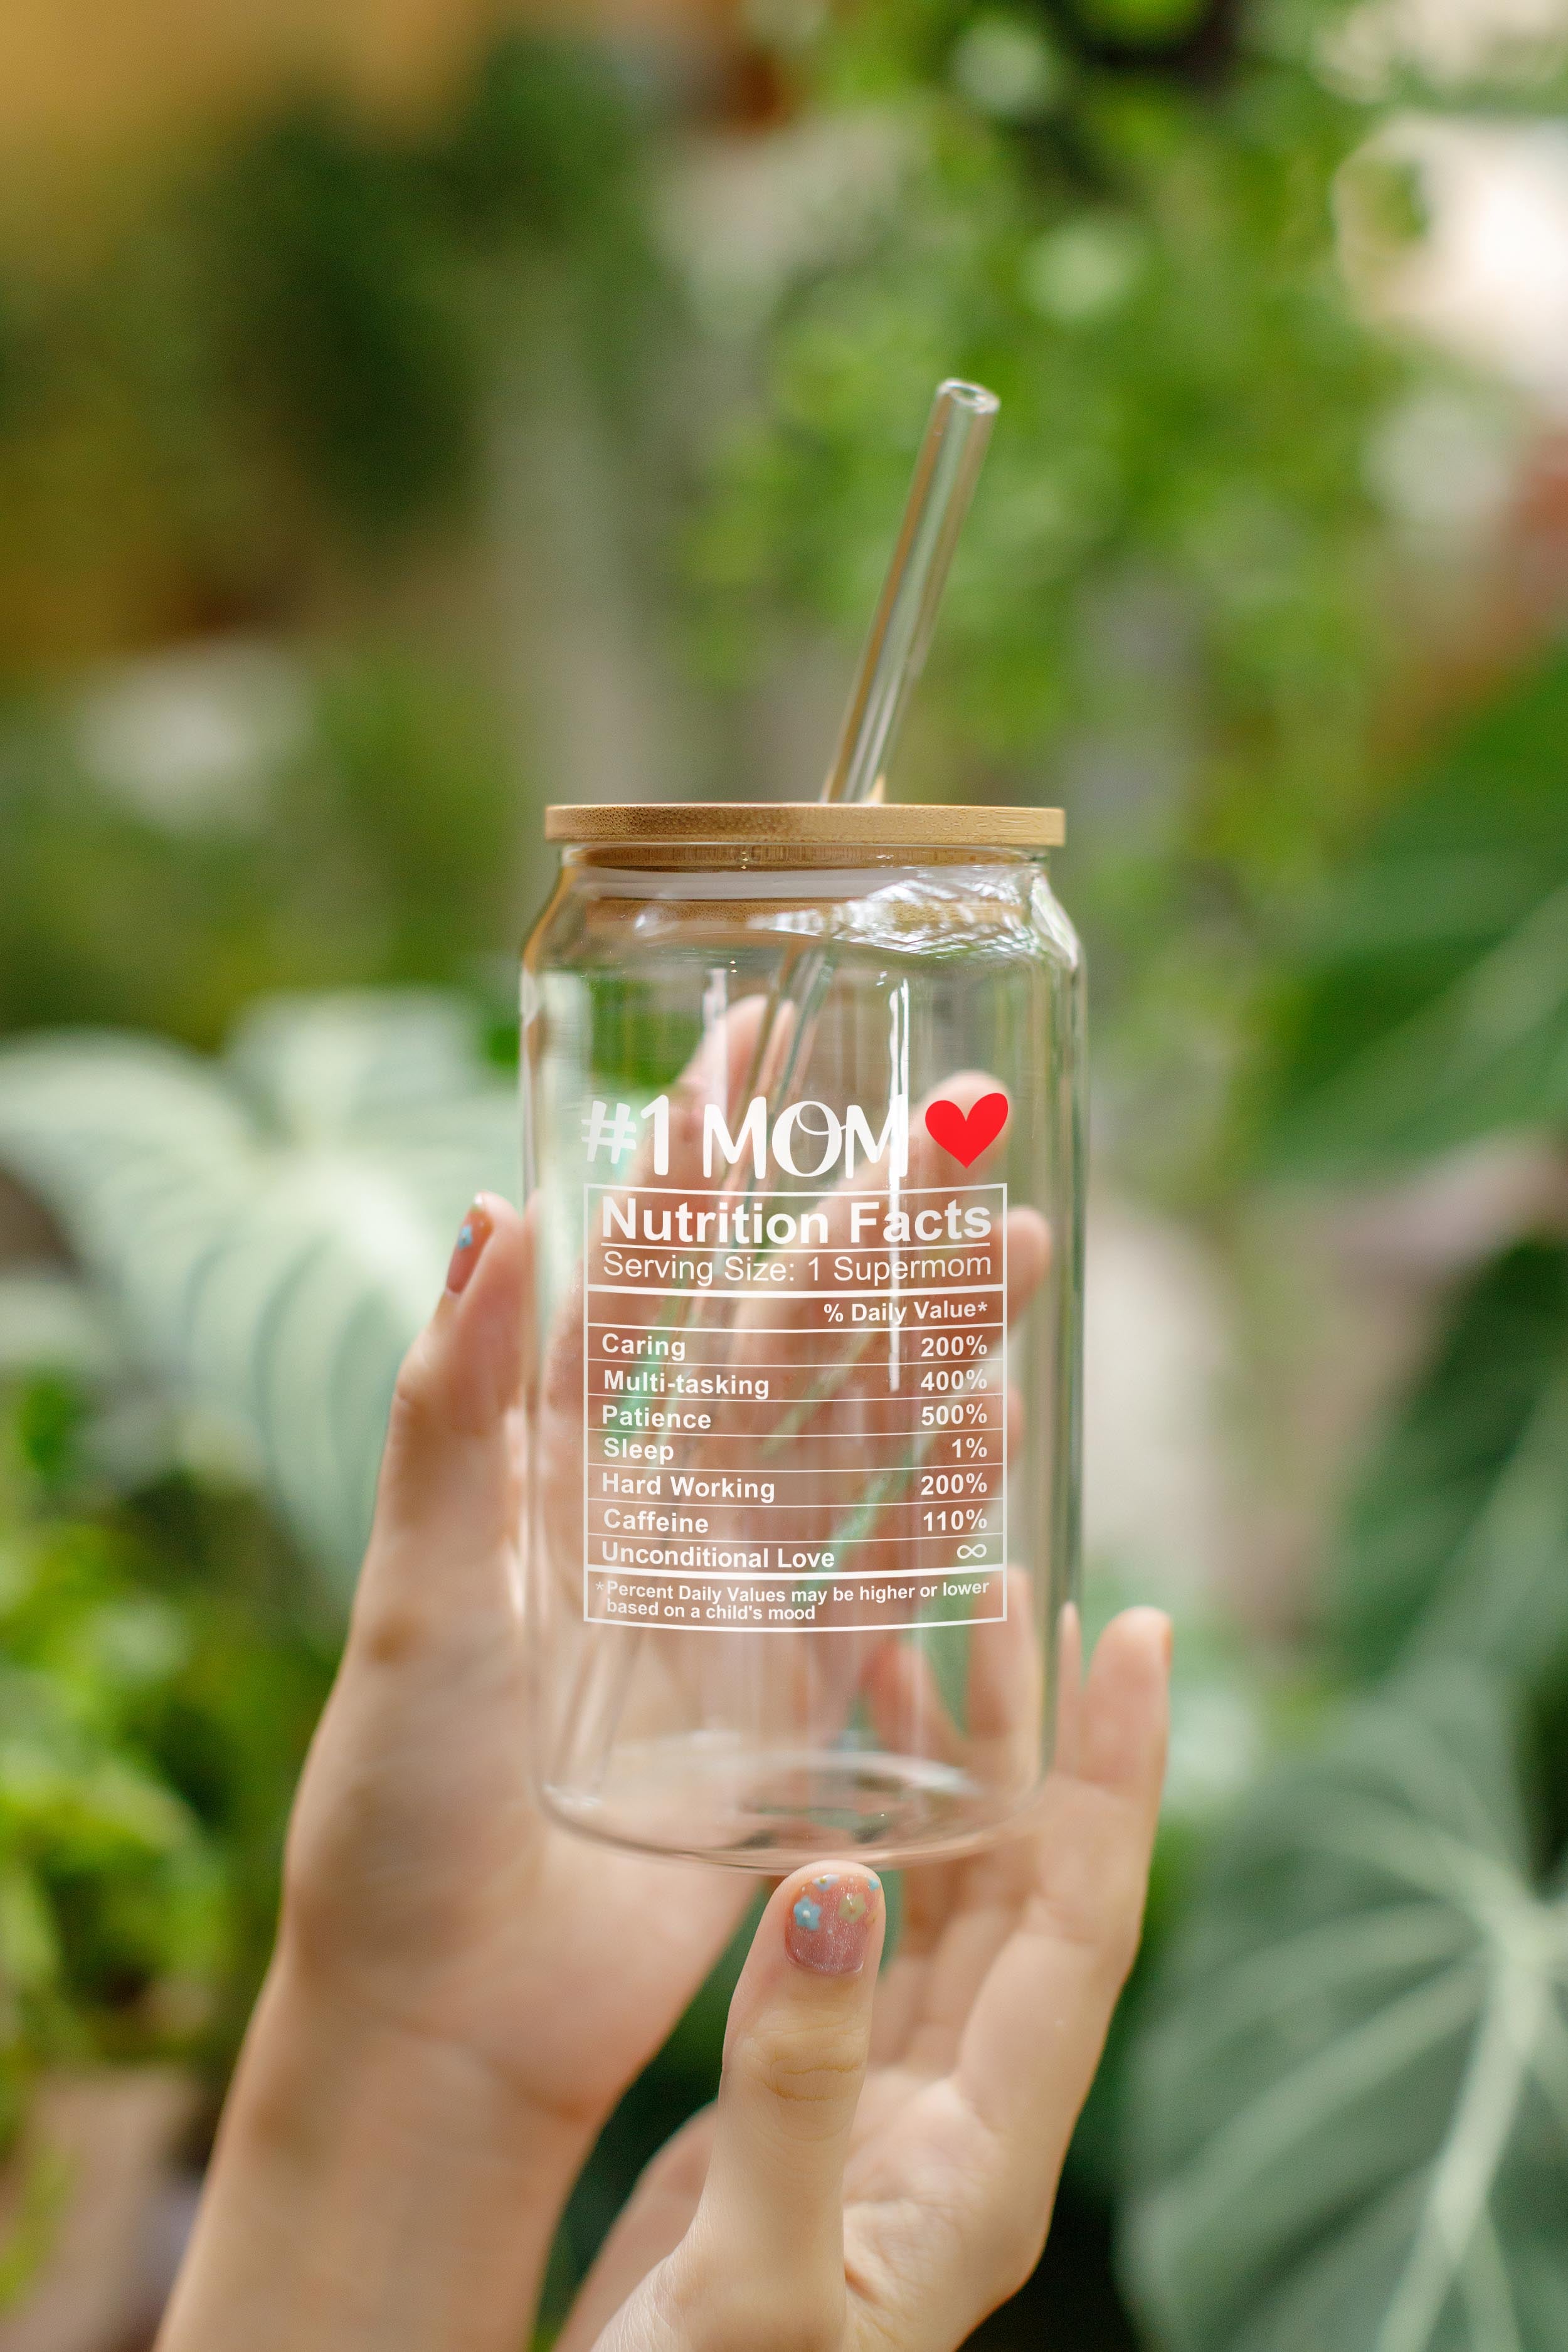 Good Gifts For Mom - Mother Day Gifts, Mom Birthday Gifts, Useful Gifts For  Mom Birthday - Presents For Mom, Mother Daughter Gifts - 16OZ Can Glass